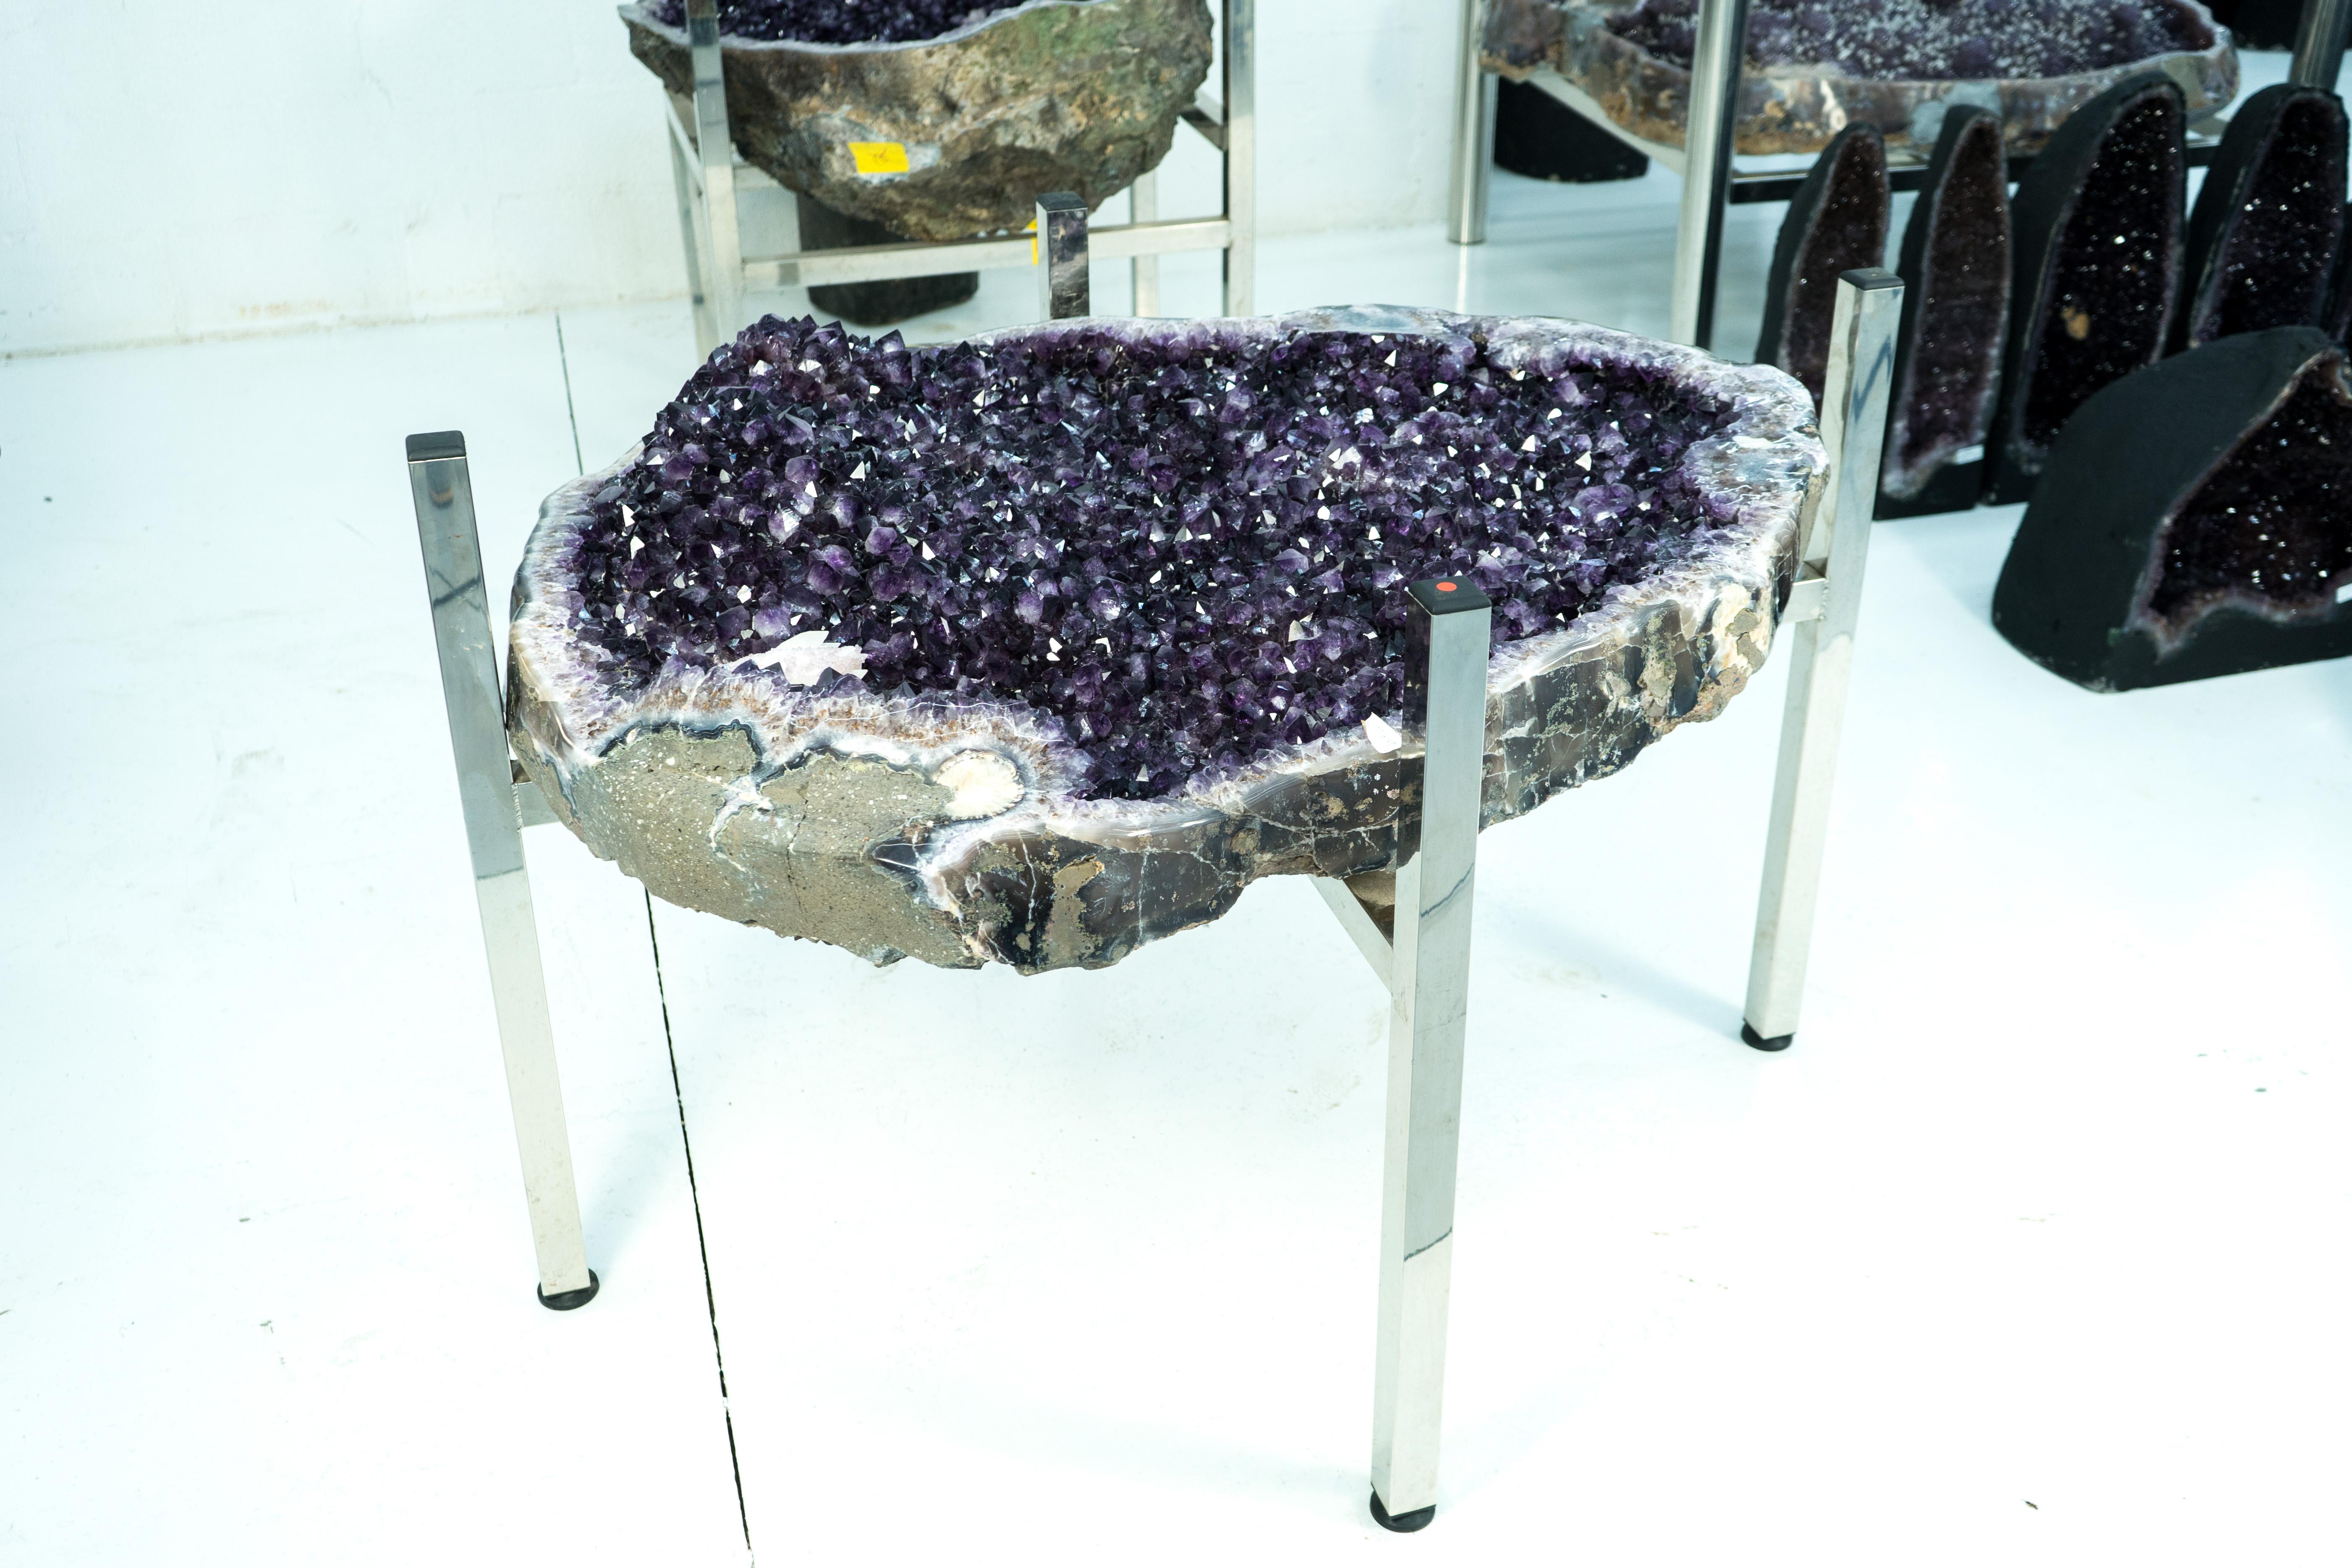 Amethyst Crystal Geode Dining Table - A Luxury Statement Piece for your Home

▫️ Description ▫️

A one-of-a-kind Amethyst Geode Table that will elevate your home decor with its unparalleled natural beauty with natural sparkling AAA Amethyst Crystals